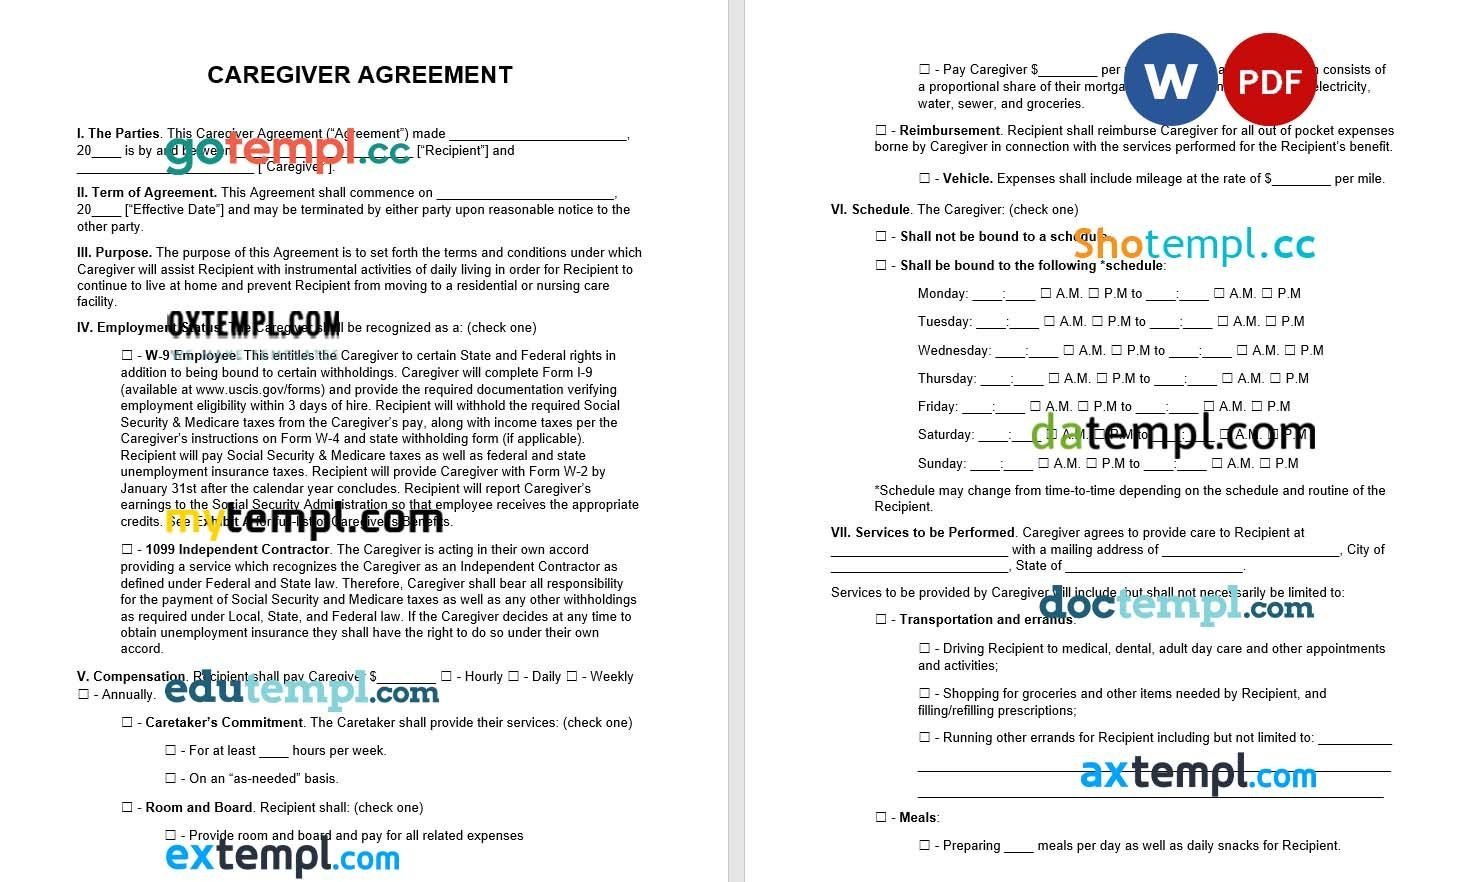 Caregiver Independent Contractor Agreement example, fully editable